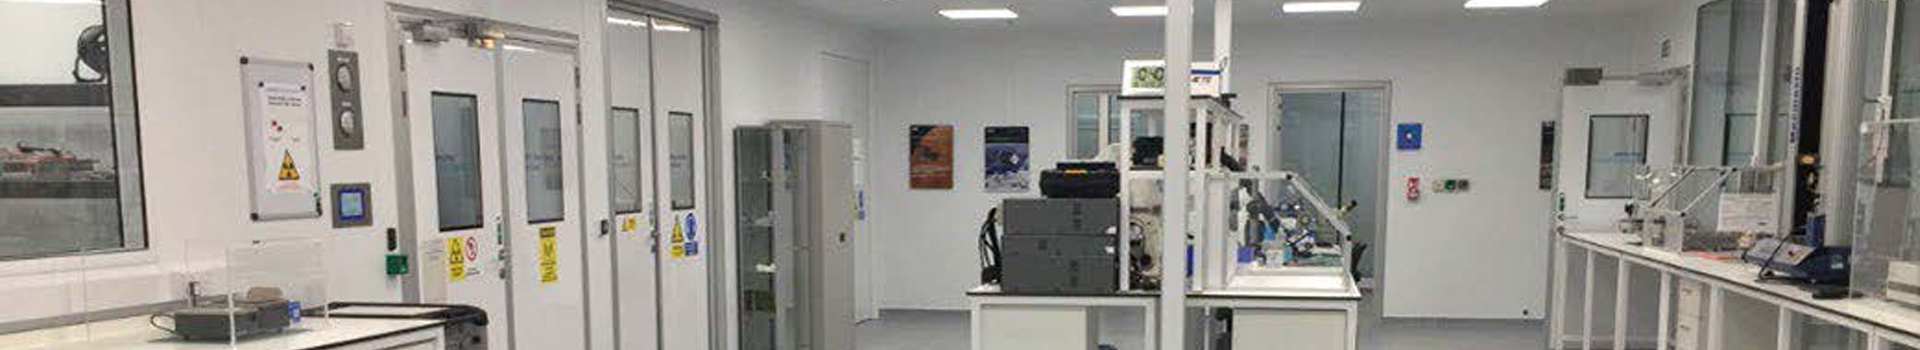 Smiths Interconnect Space Laboratory